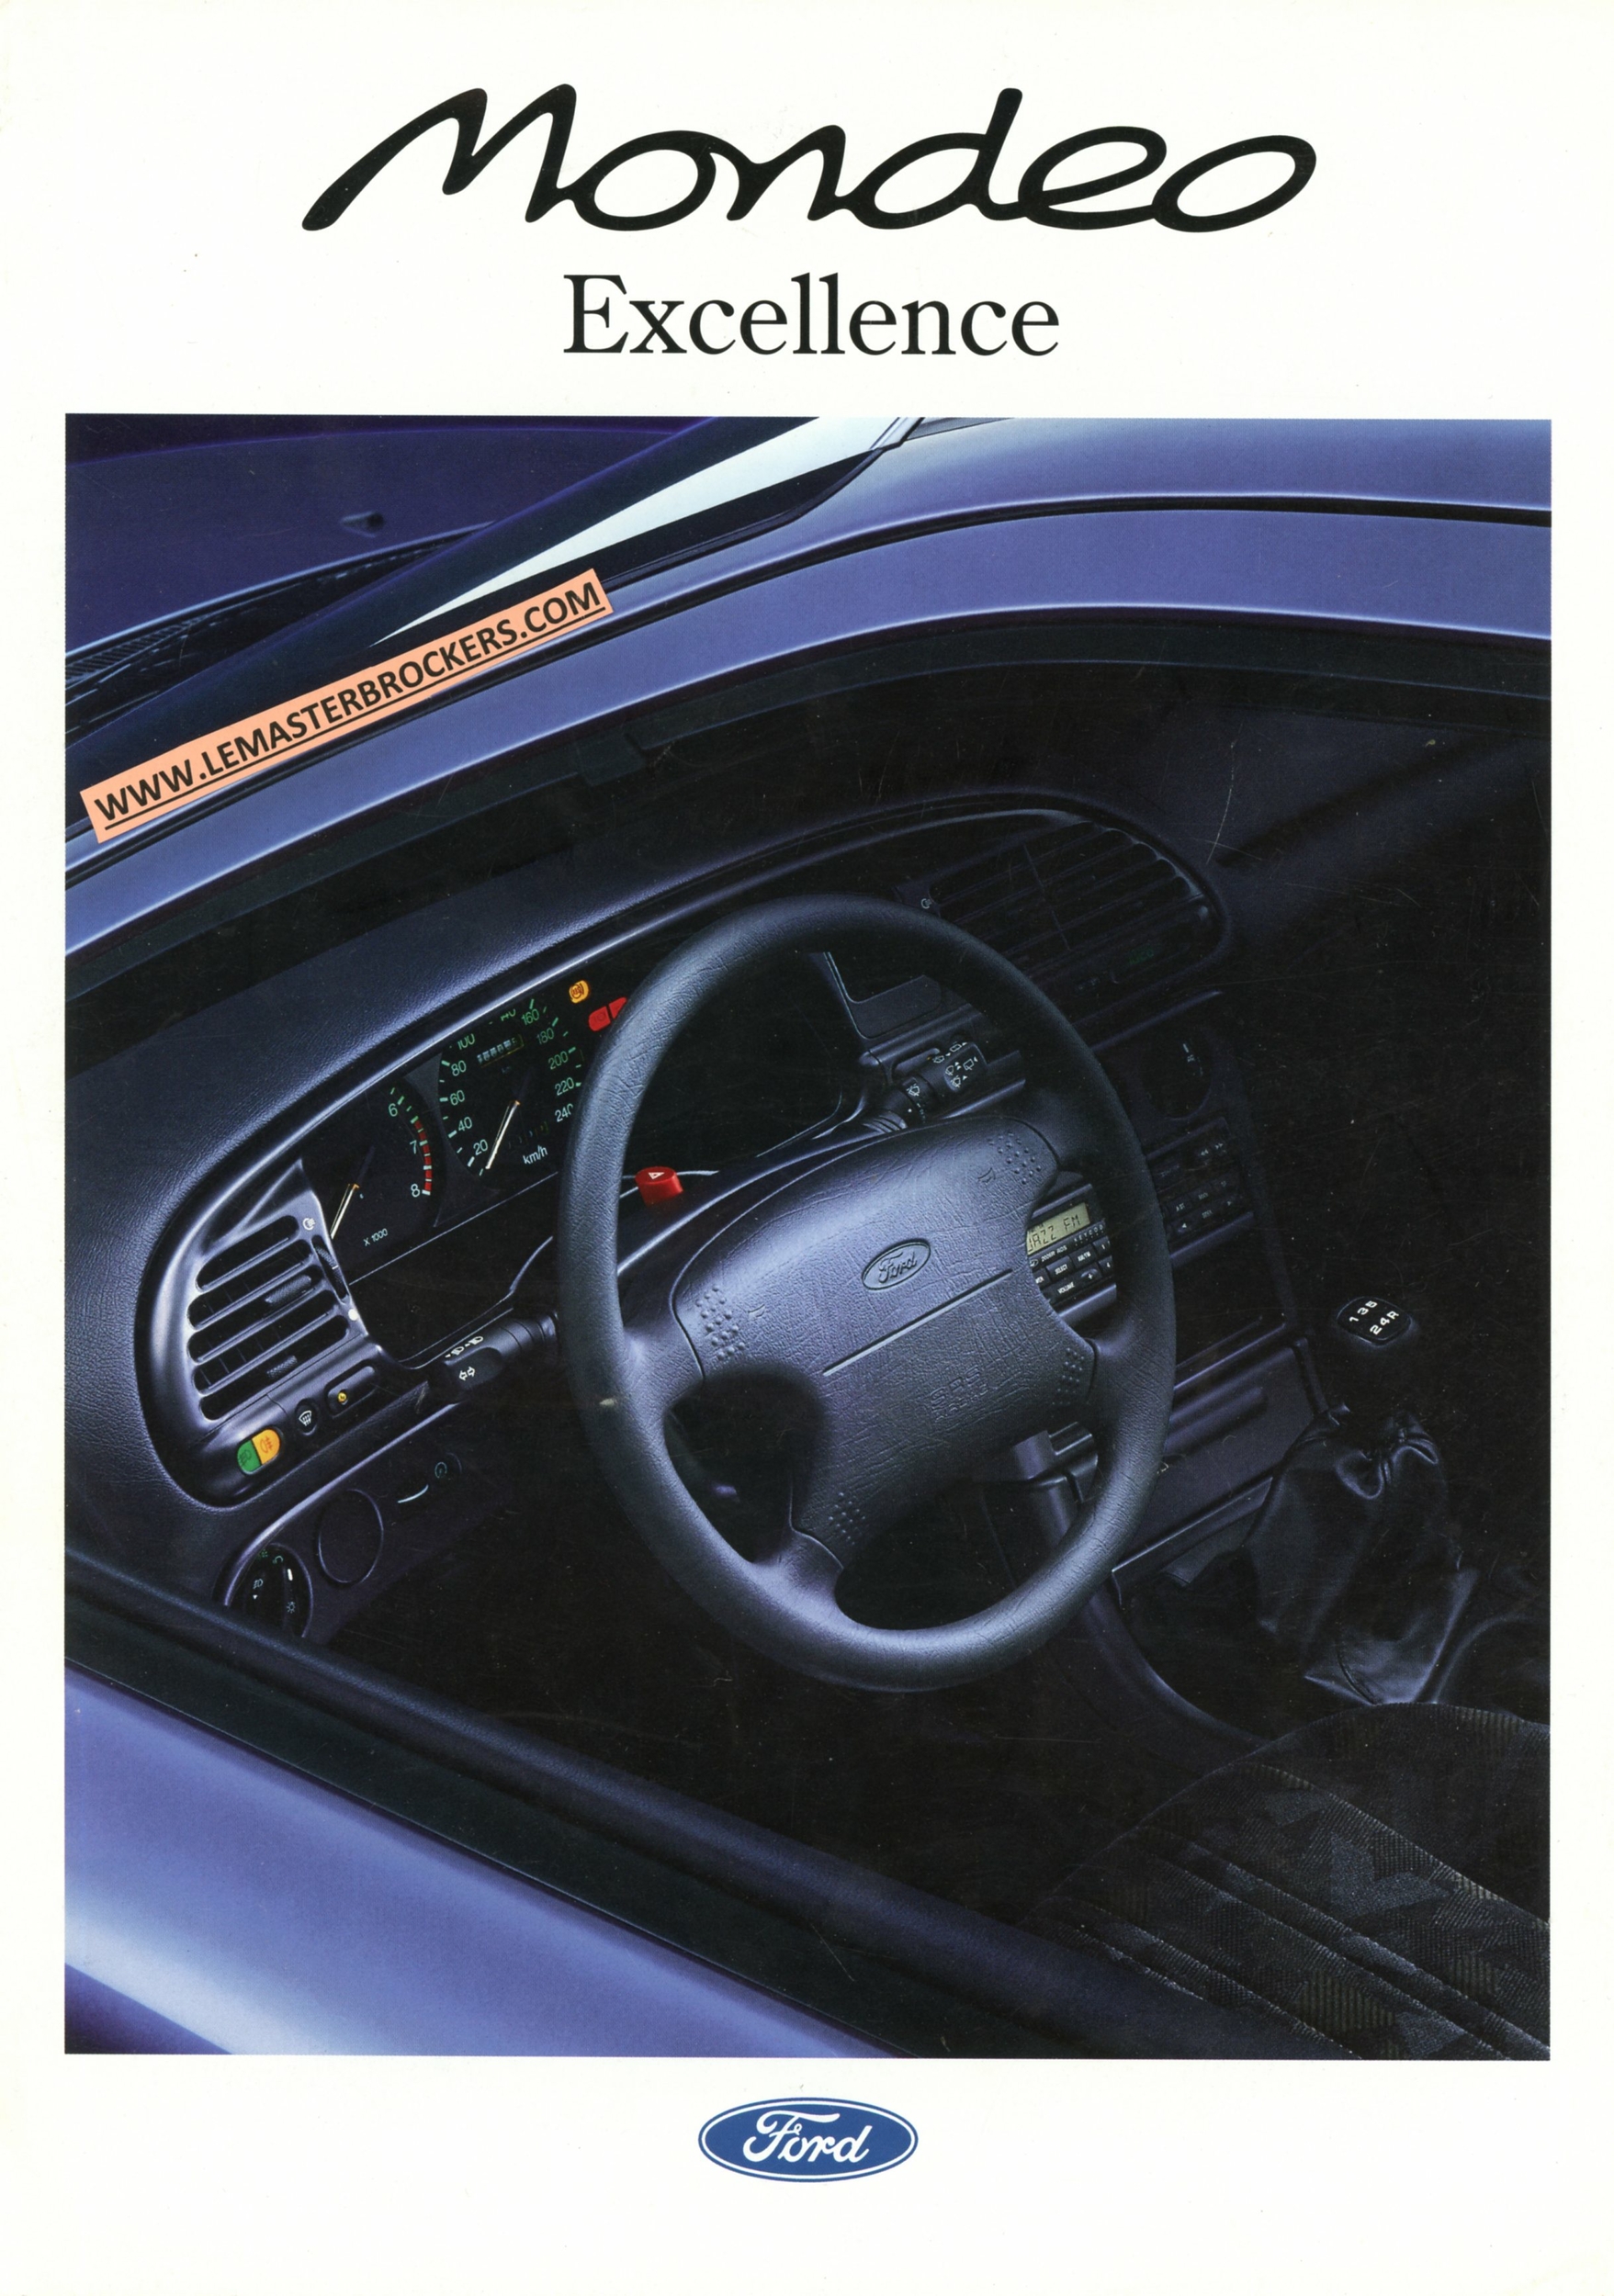 BROCHURE FORD MONDEO EXCELLENCE - DOCUMENTATION BROCHURE AUTO